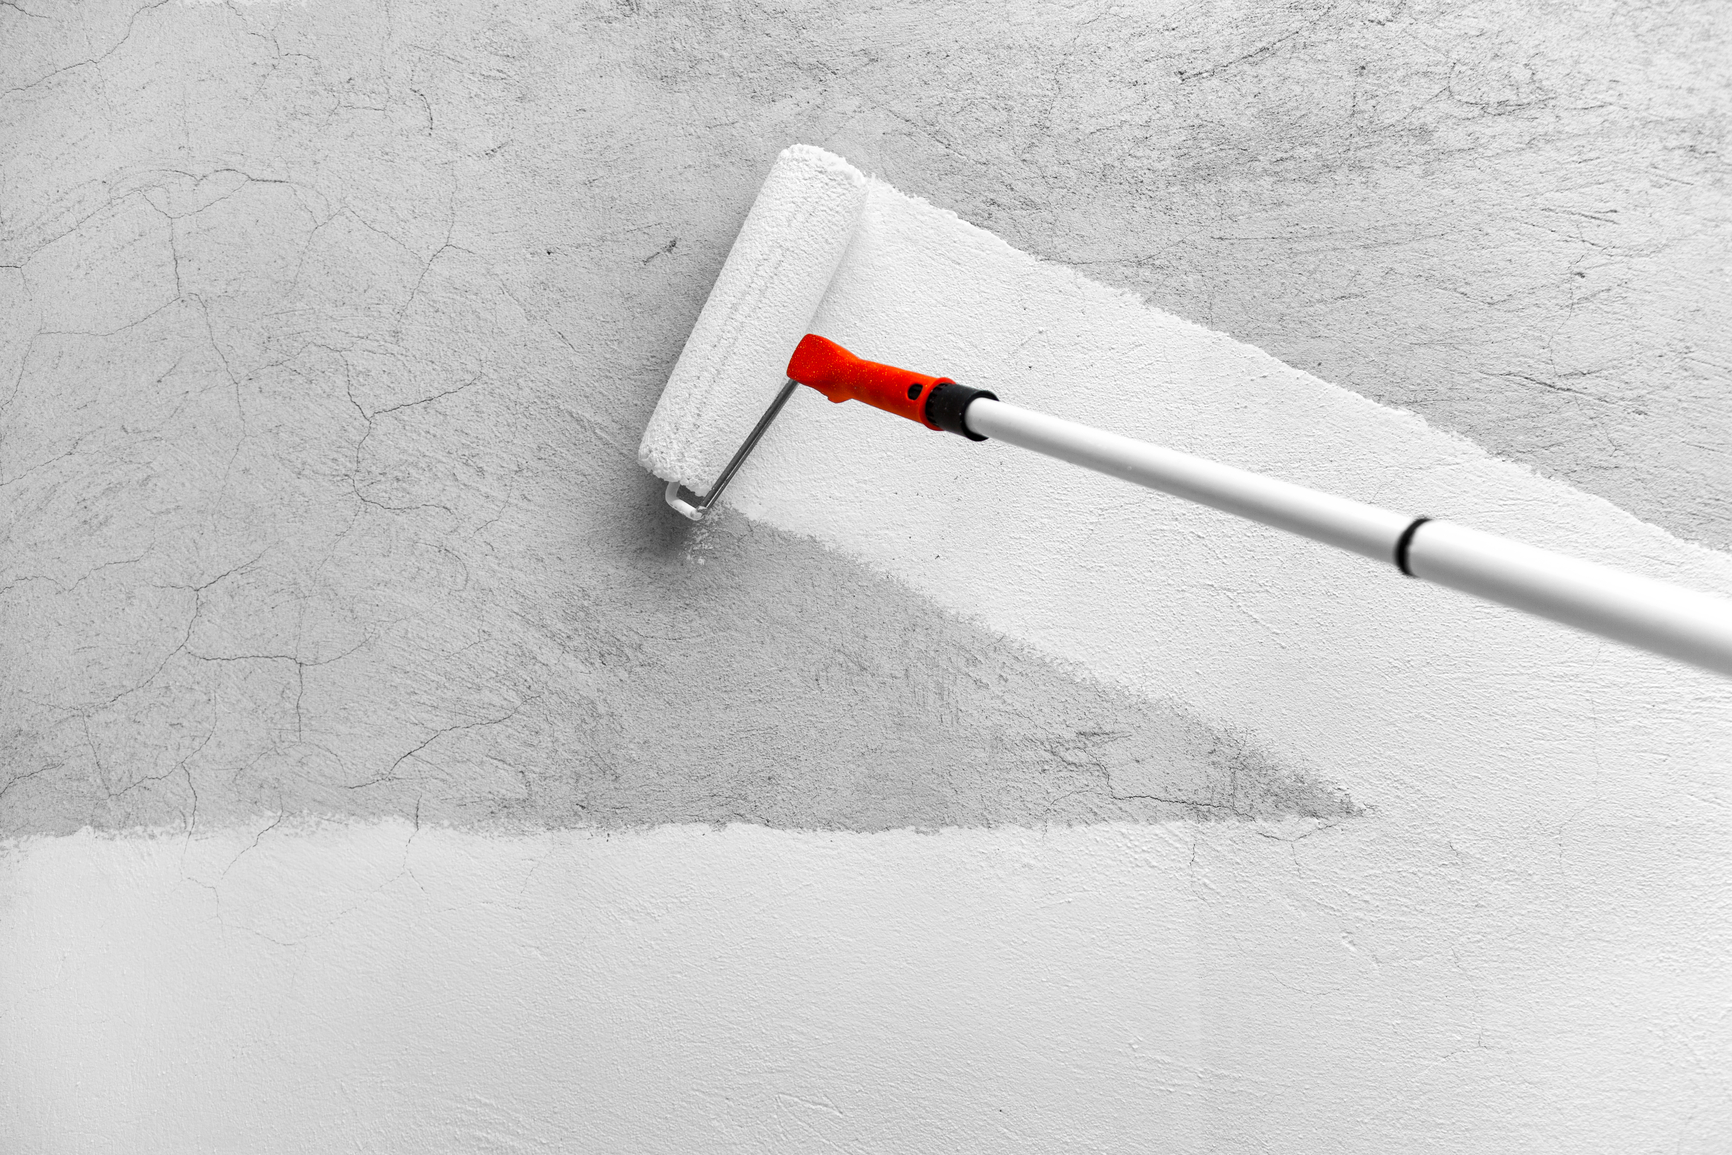 Do You Really Need Primer Coat Before Painting?